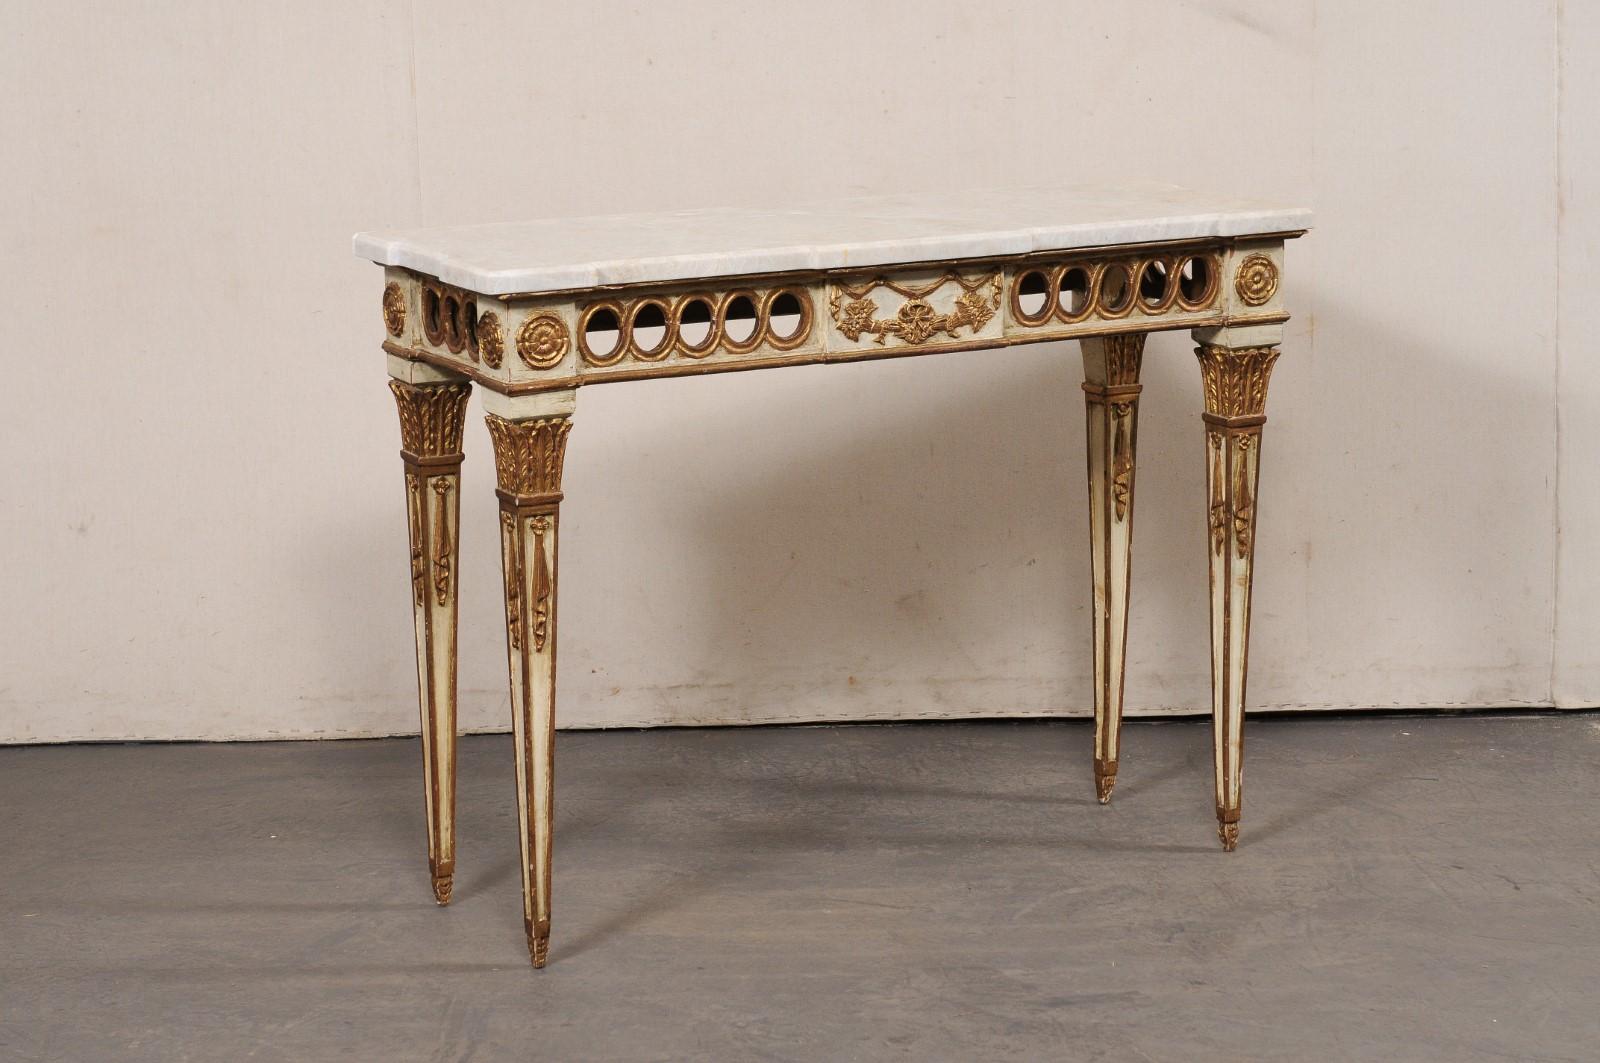 An Italian Neoclassic style carved-wood console, with original finish and a new quartzite top, from the mid 20th century. This vintage table from Italy has a new custom 